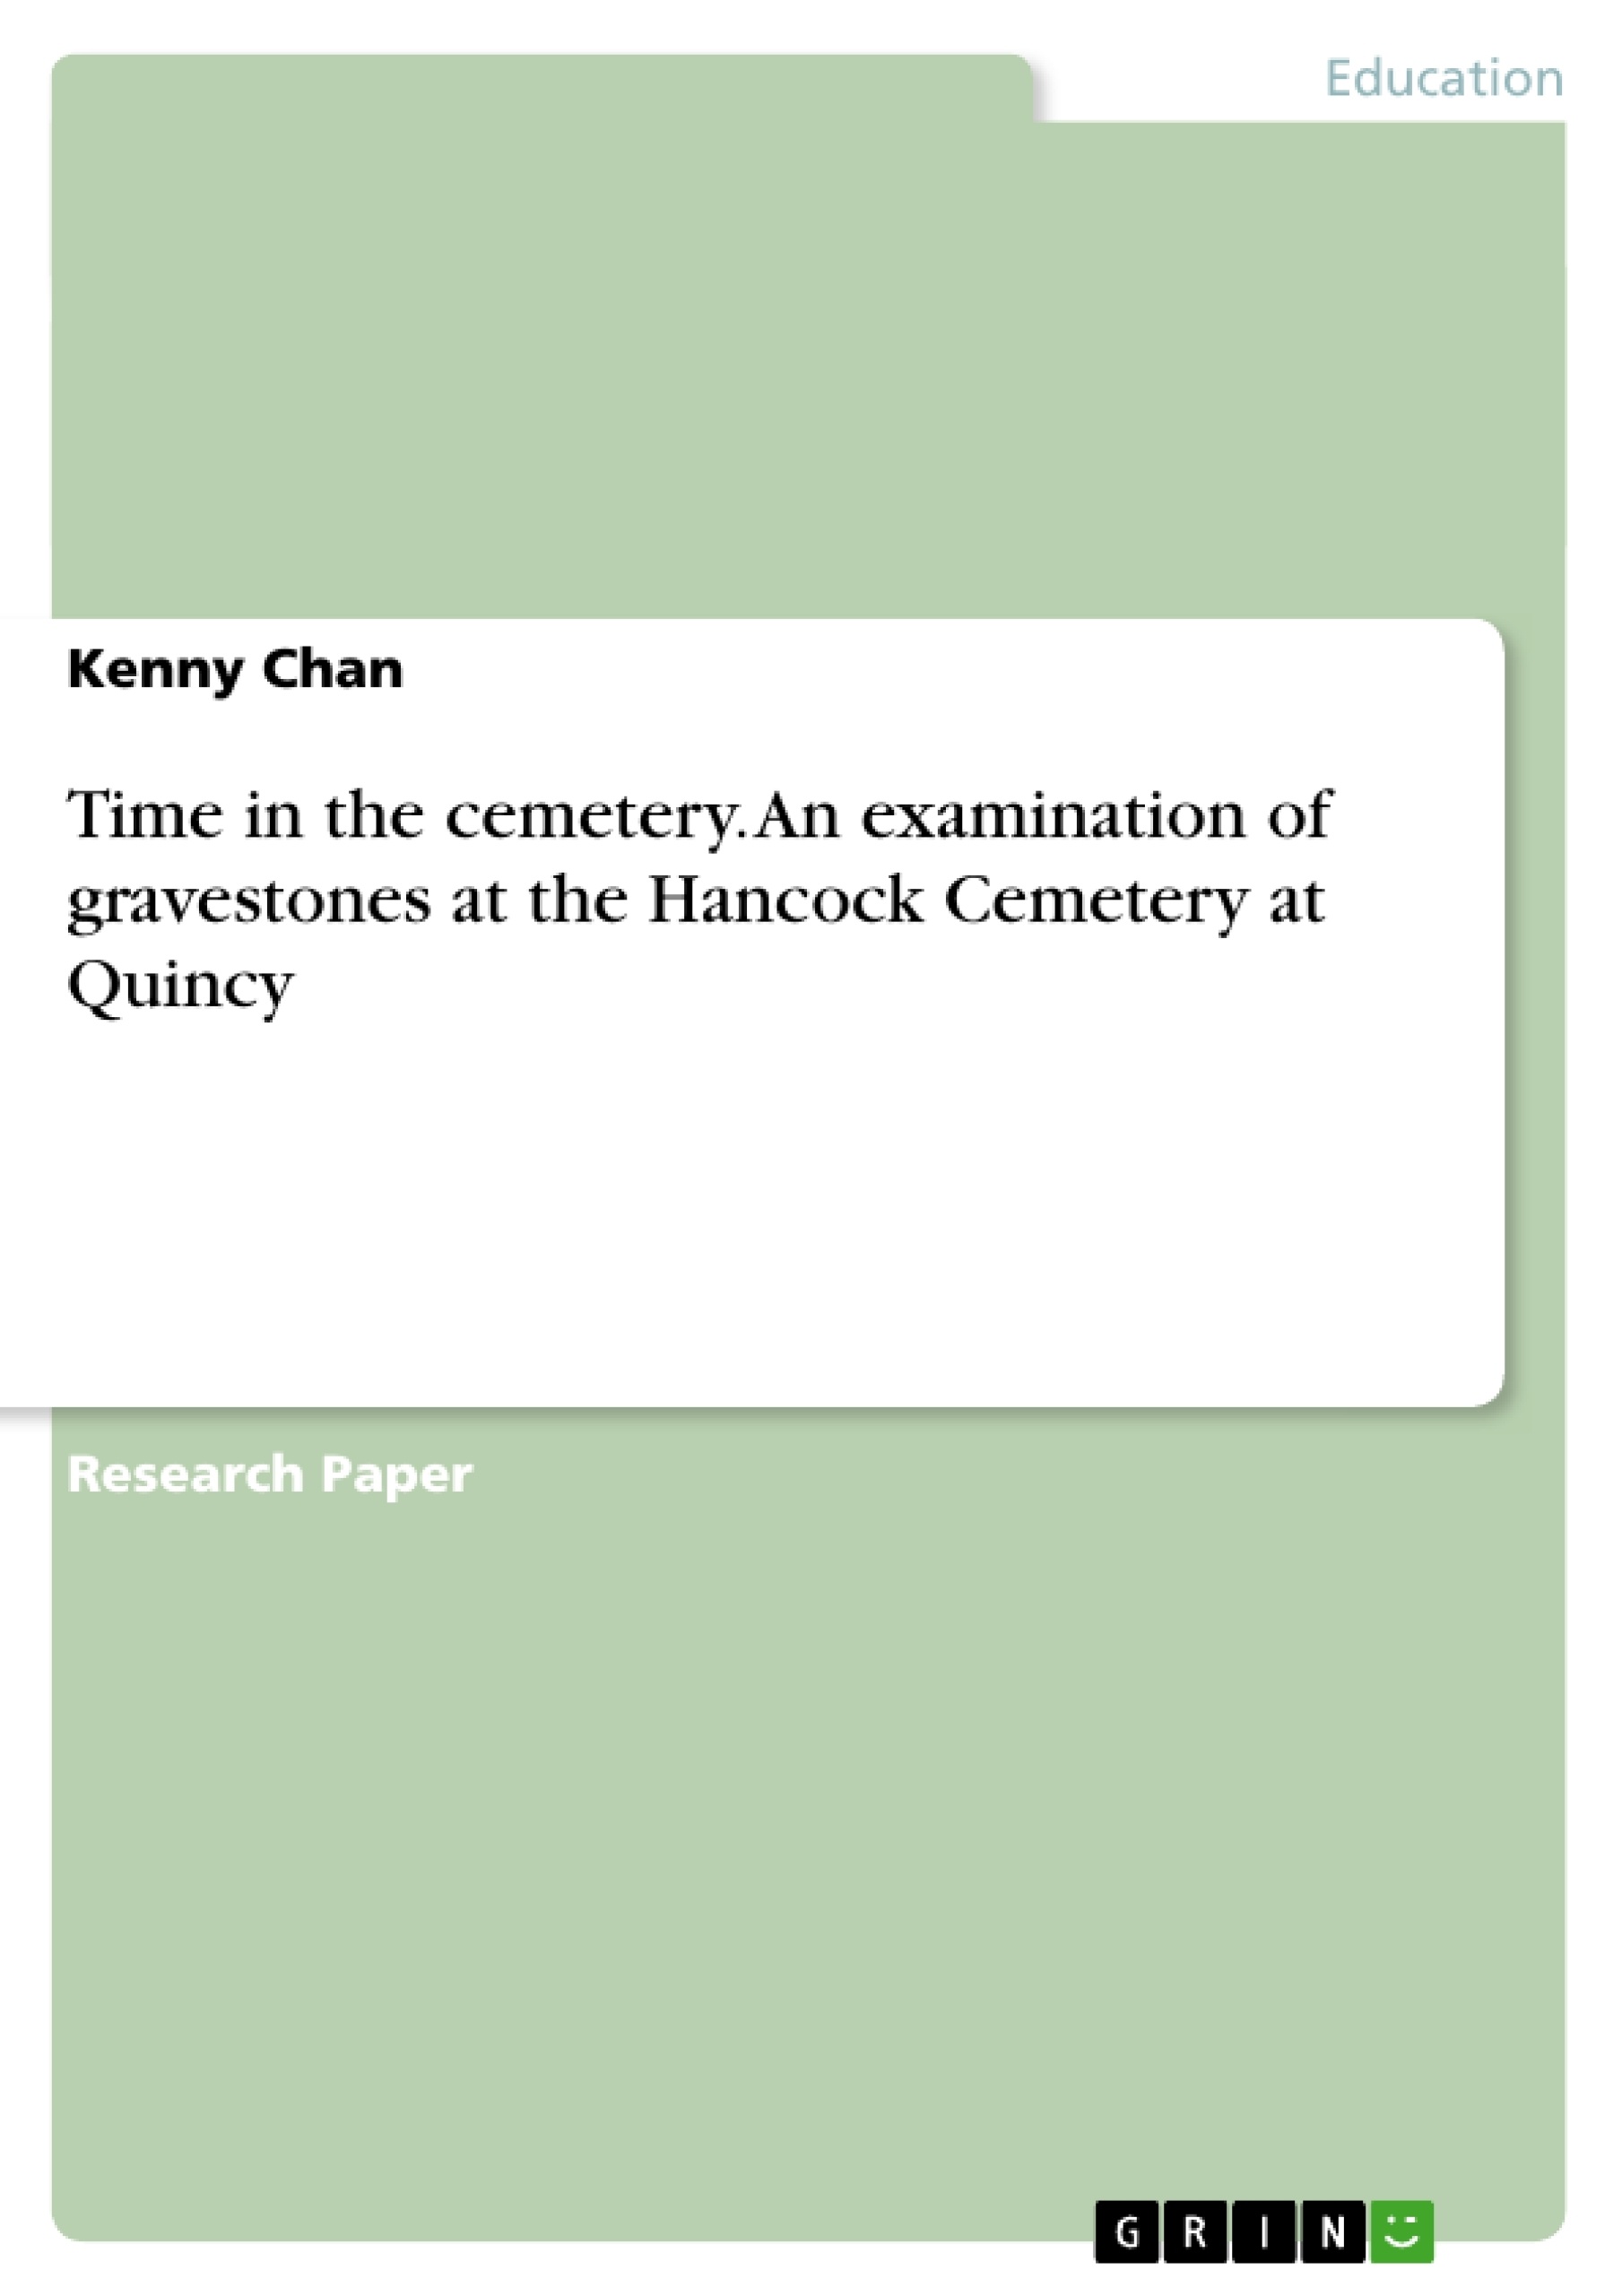 Title: Time in the cemetery. An examination of gravestones at the Hancock Cemetery at Quincy